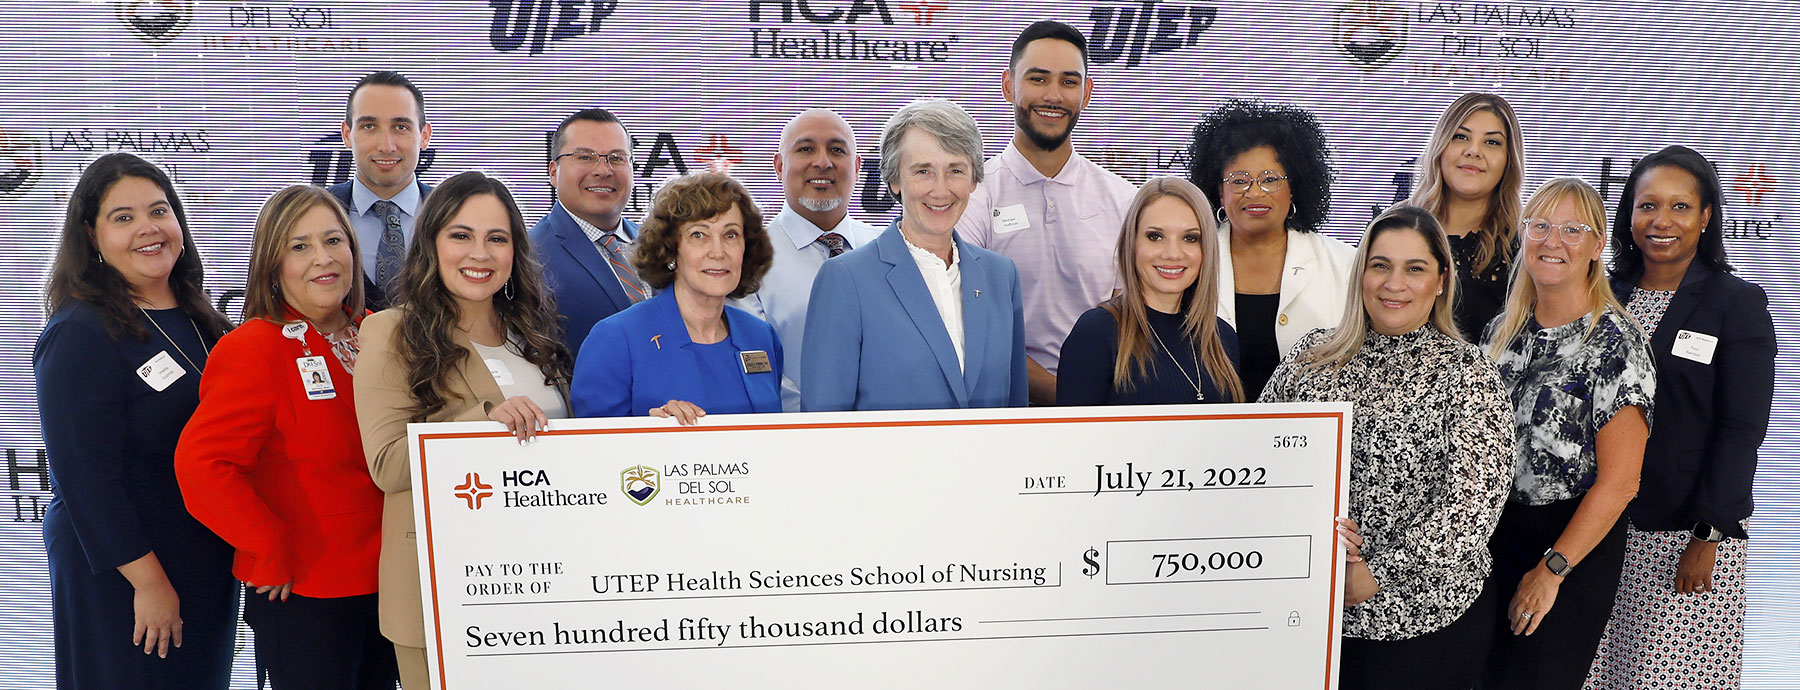 UTEP and HCA Healthcare, including its El Paso-affiliate Las Palmas Del Sol Healthcare, announce partnership for nursing and healthcare administration programs 